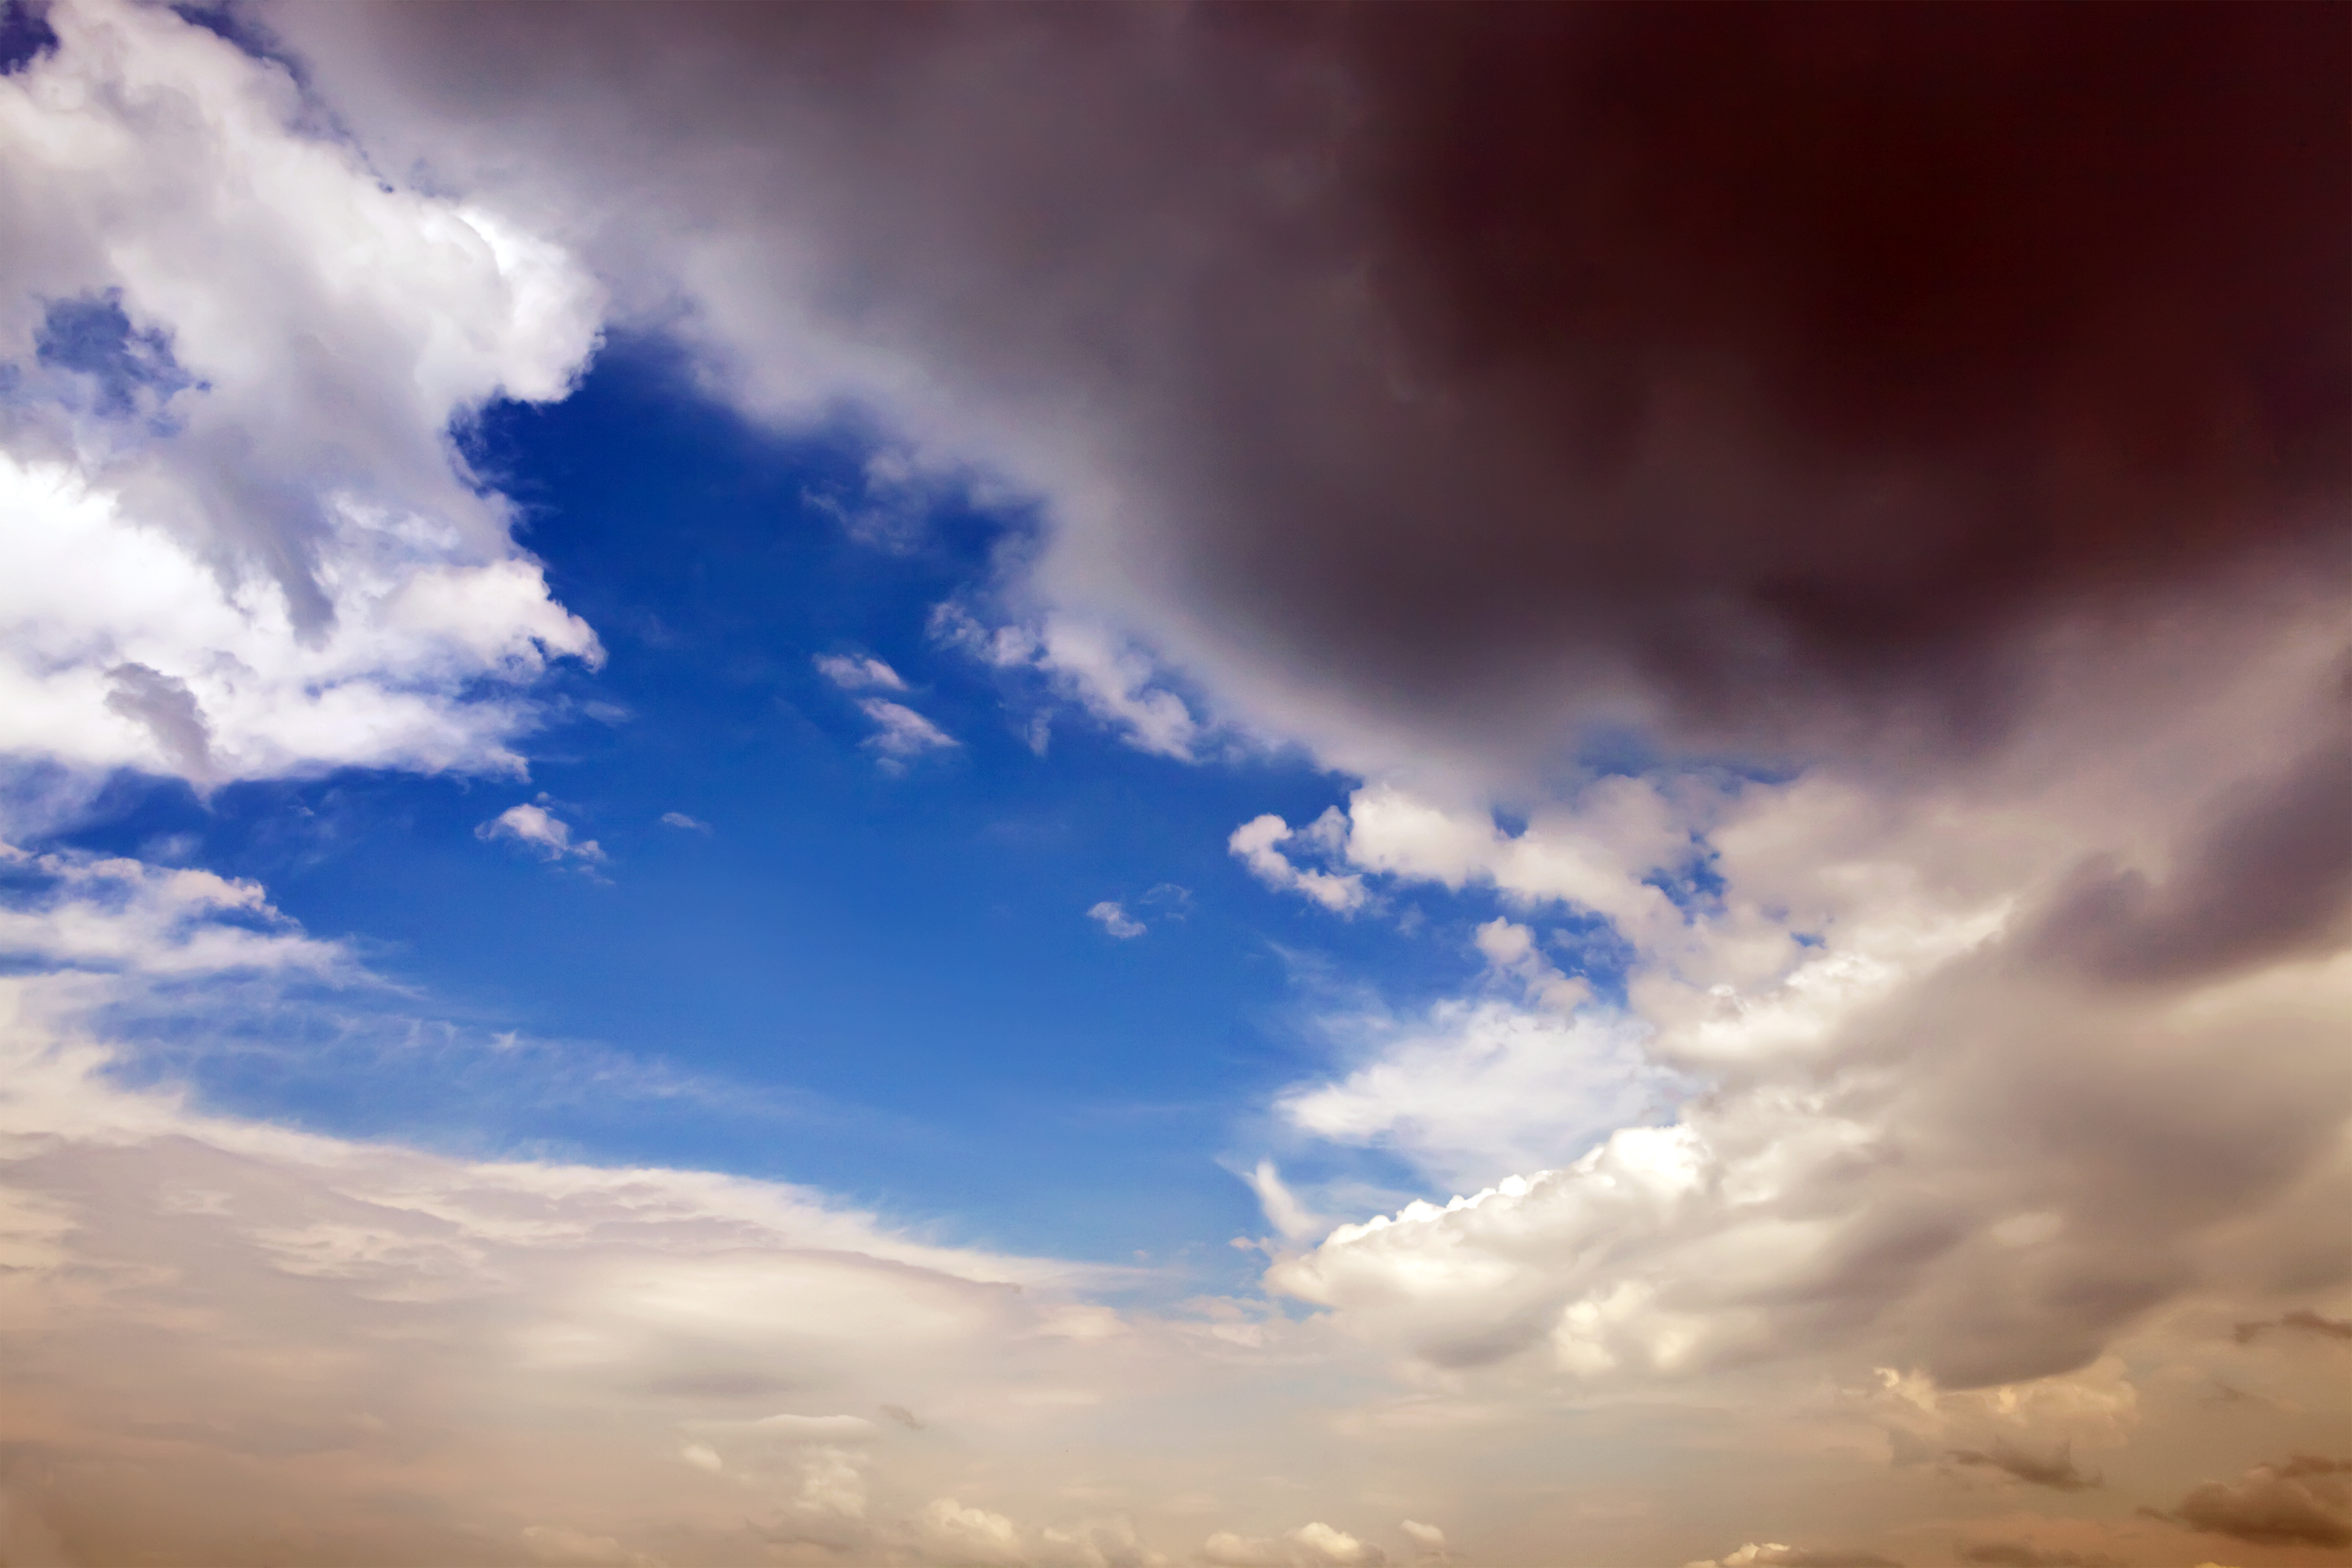 cloudy sky, Clouds, Meteorology, Stormy, Storm, HQ Photo